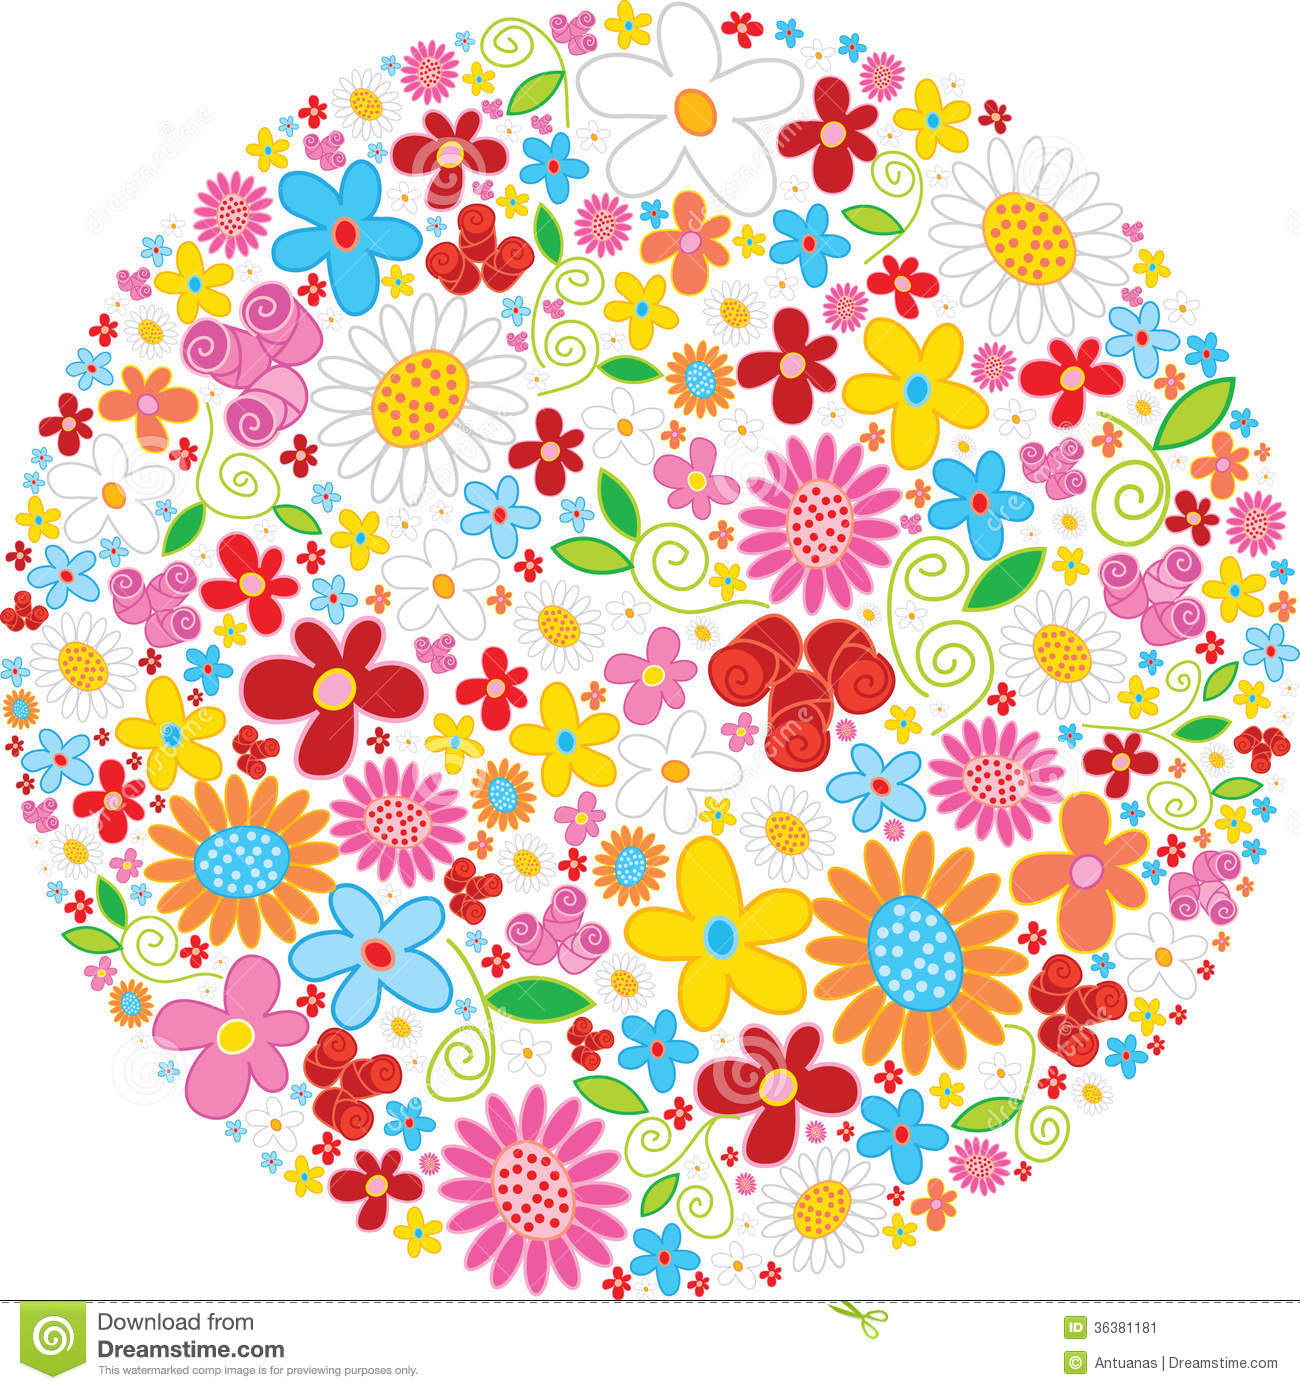 FLOWER BALL CLIPART - 353px Image #19